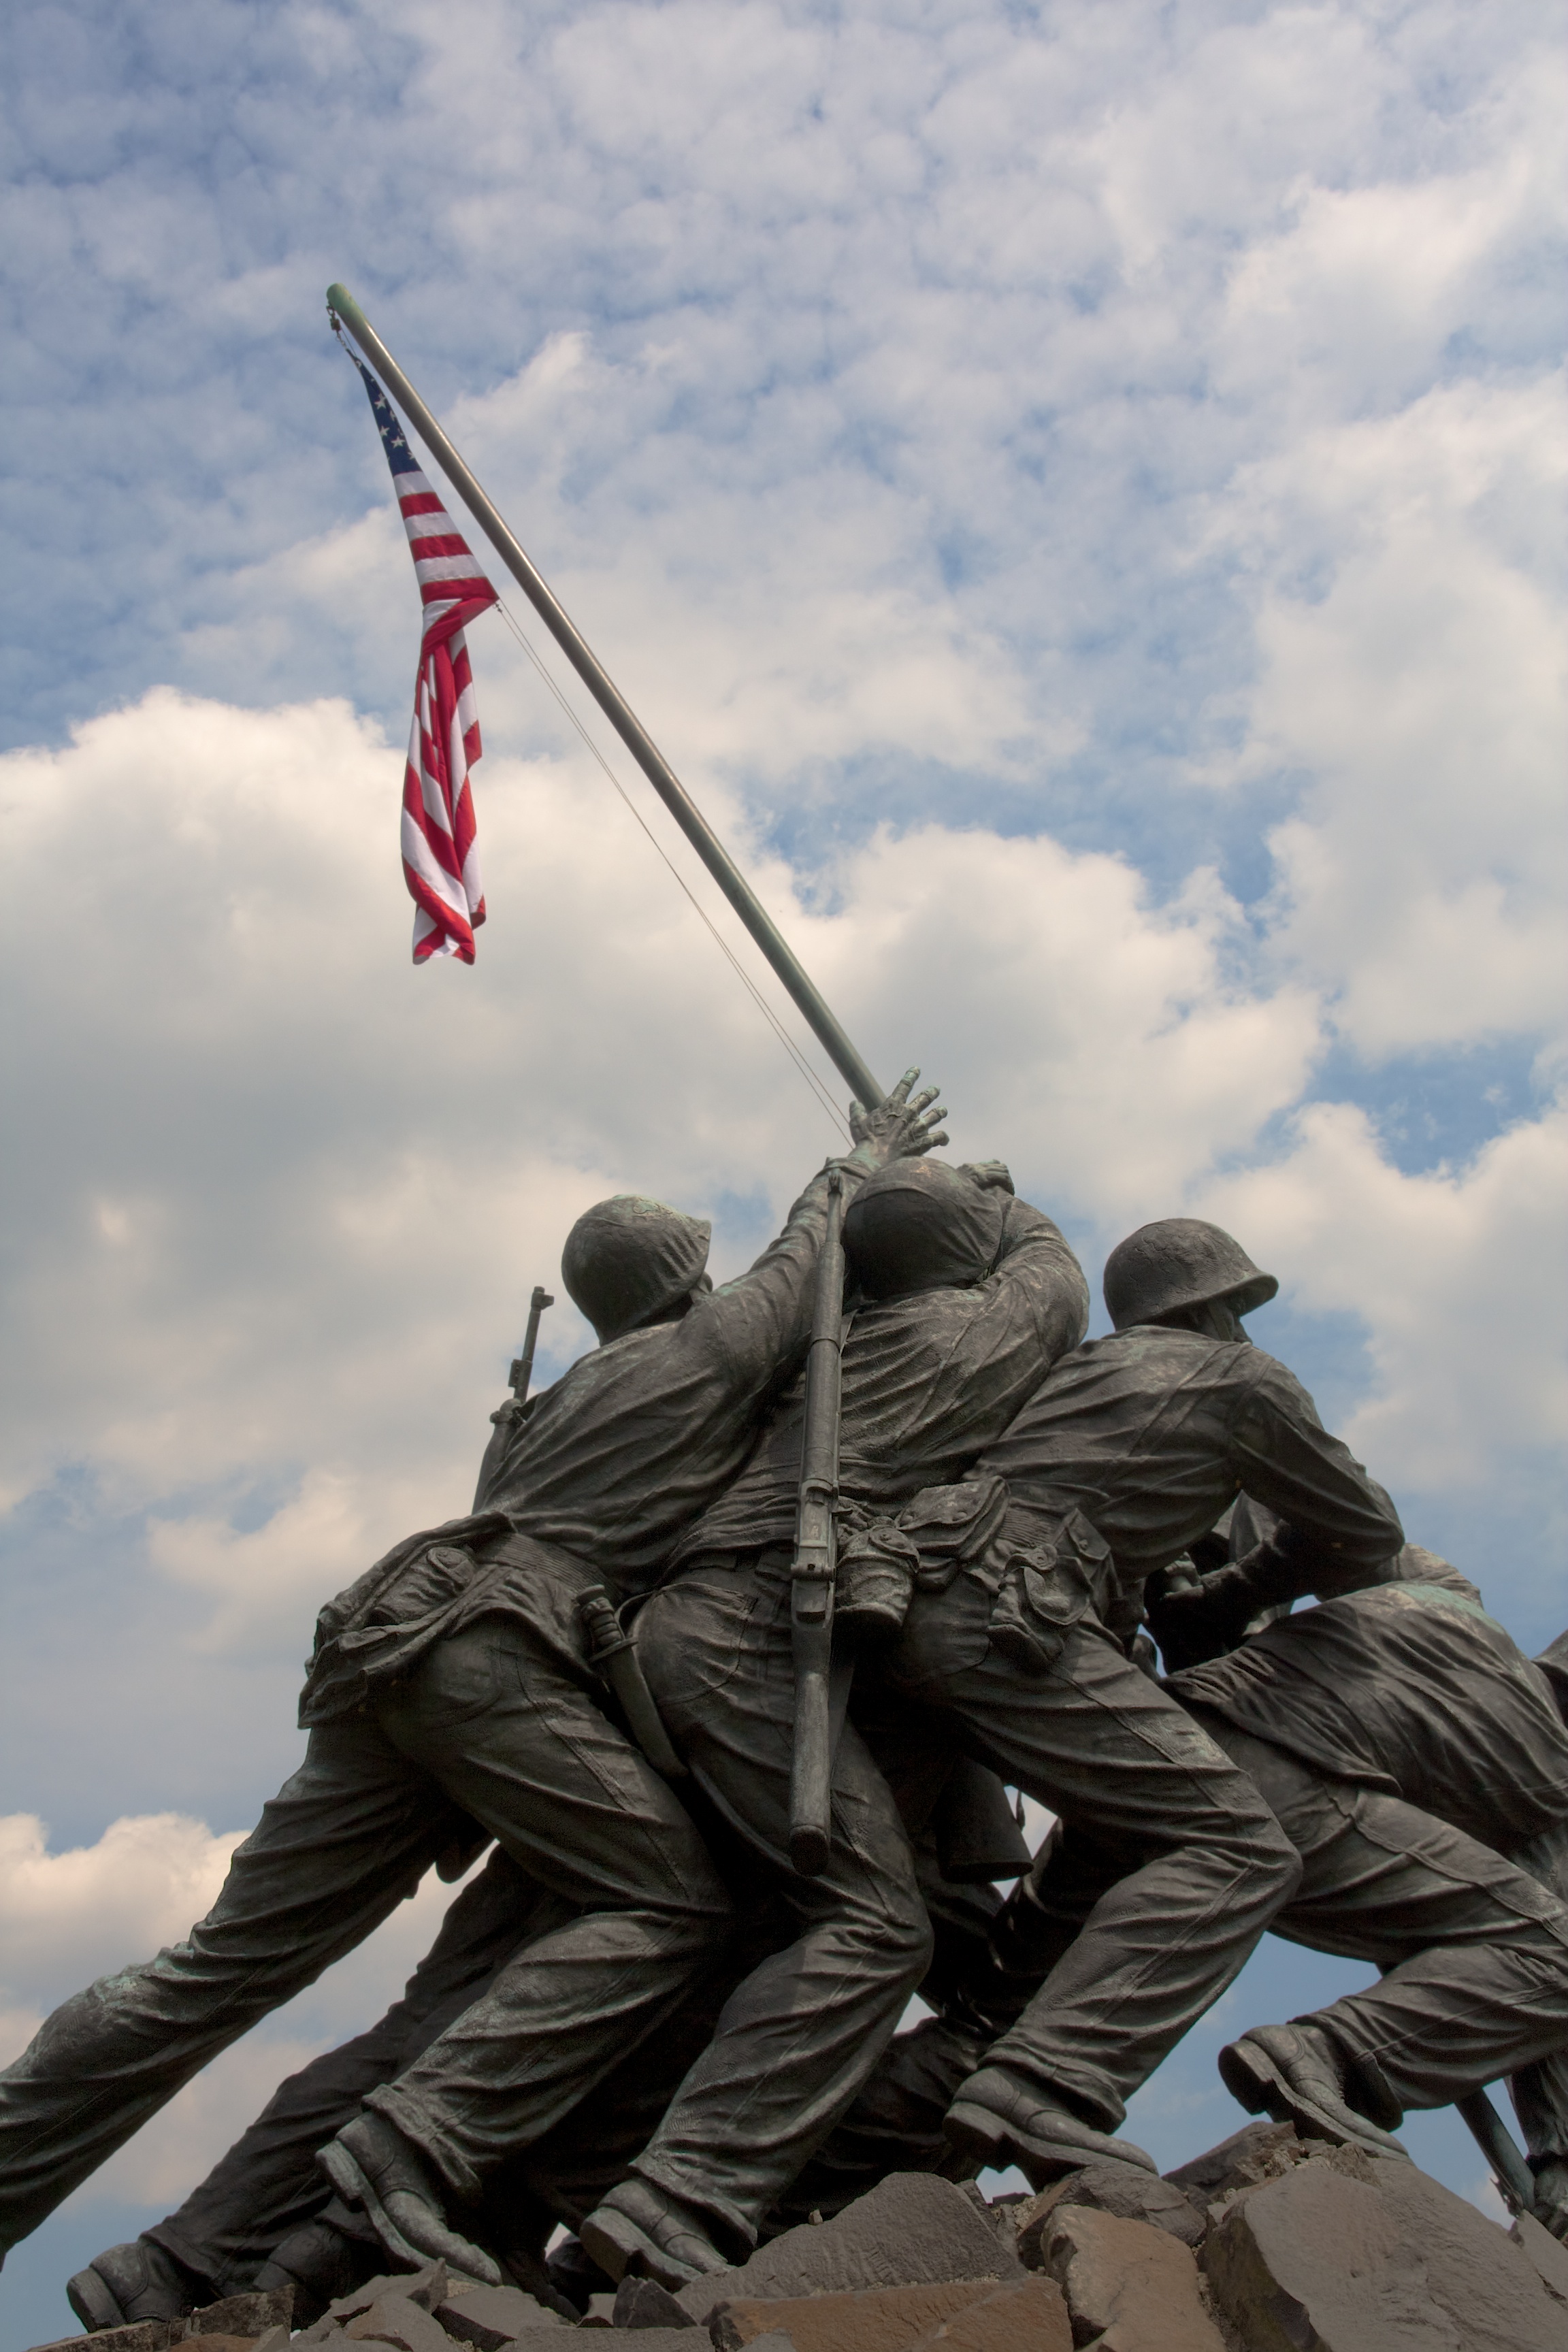 Iwo Jima statue of marines raising a flag on the top of a mountain.